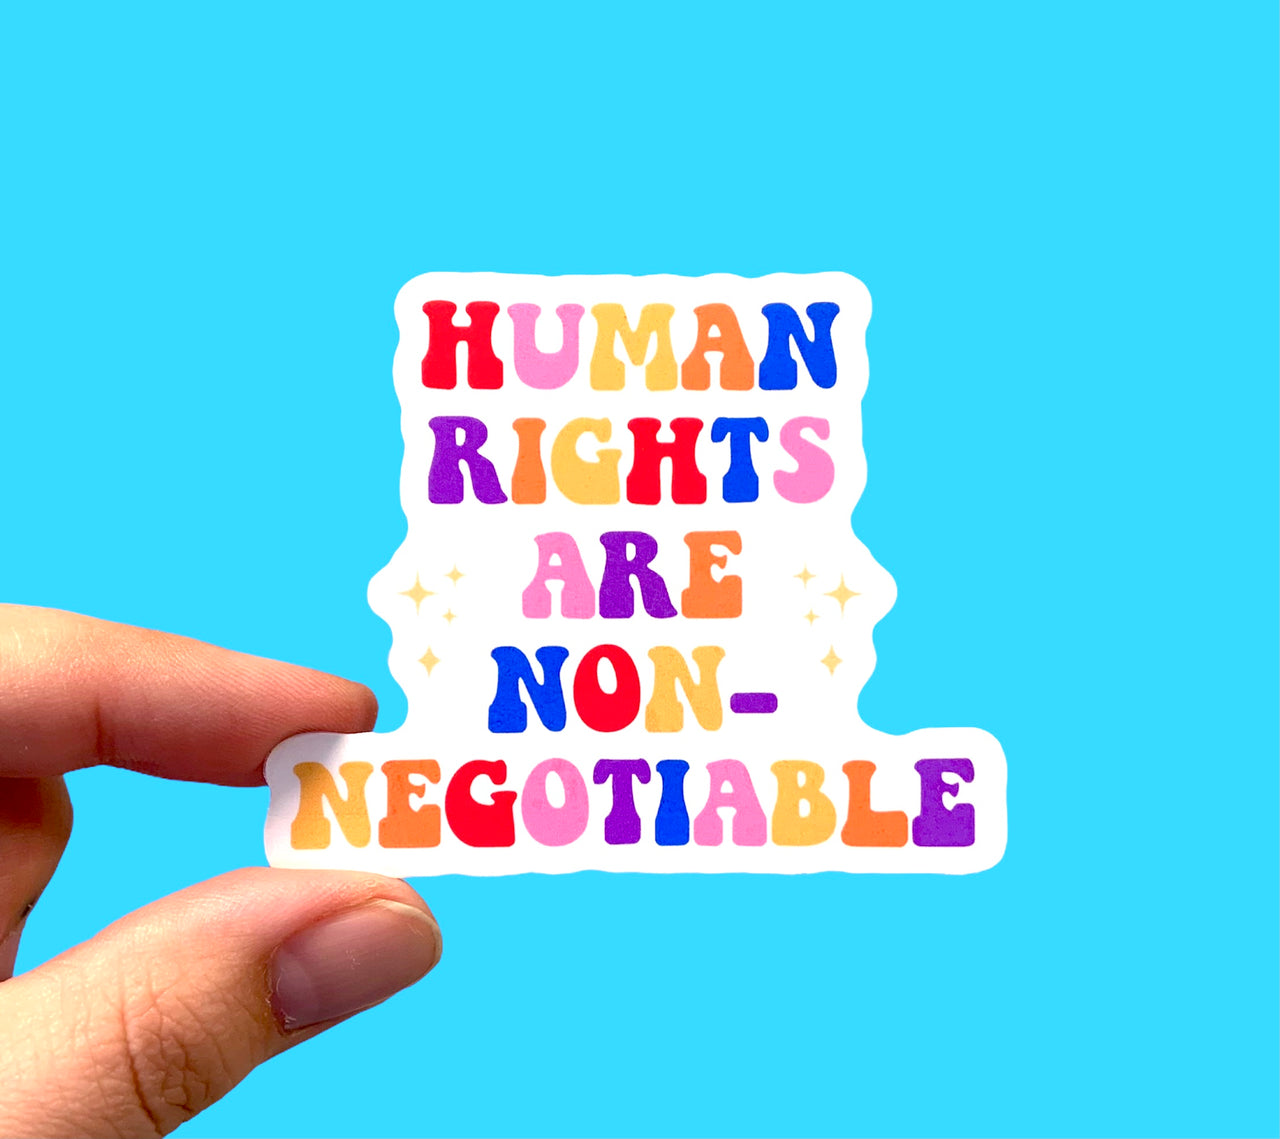 Human rights are non negotiable